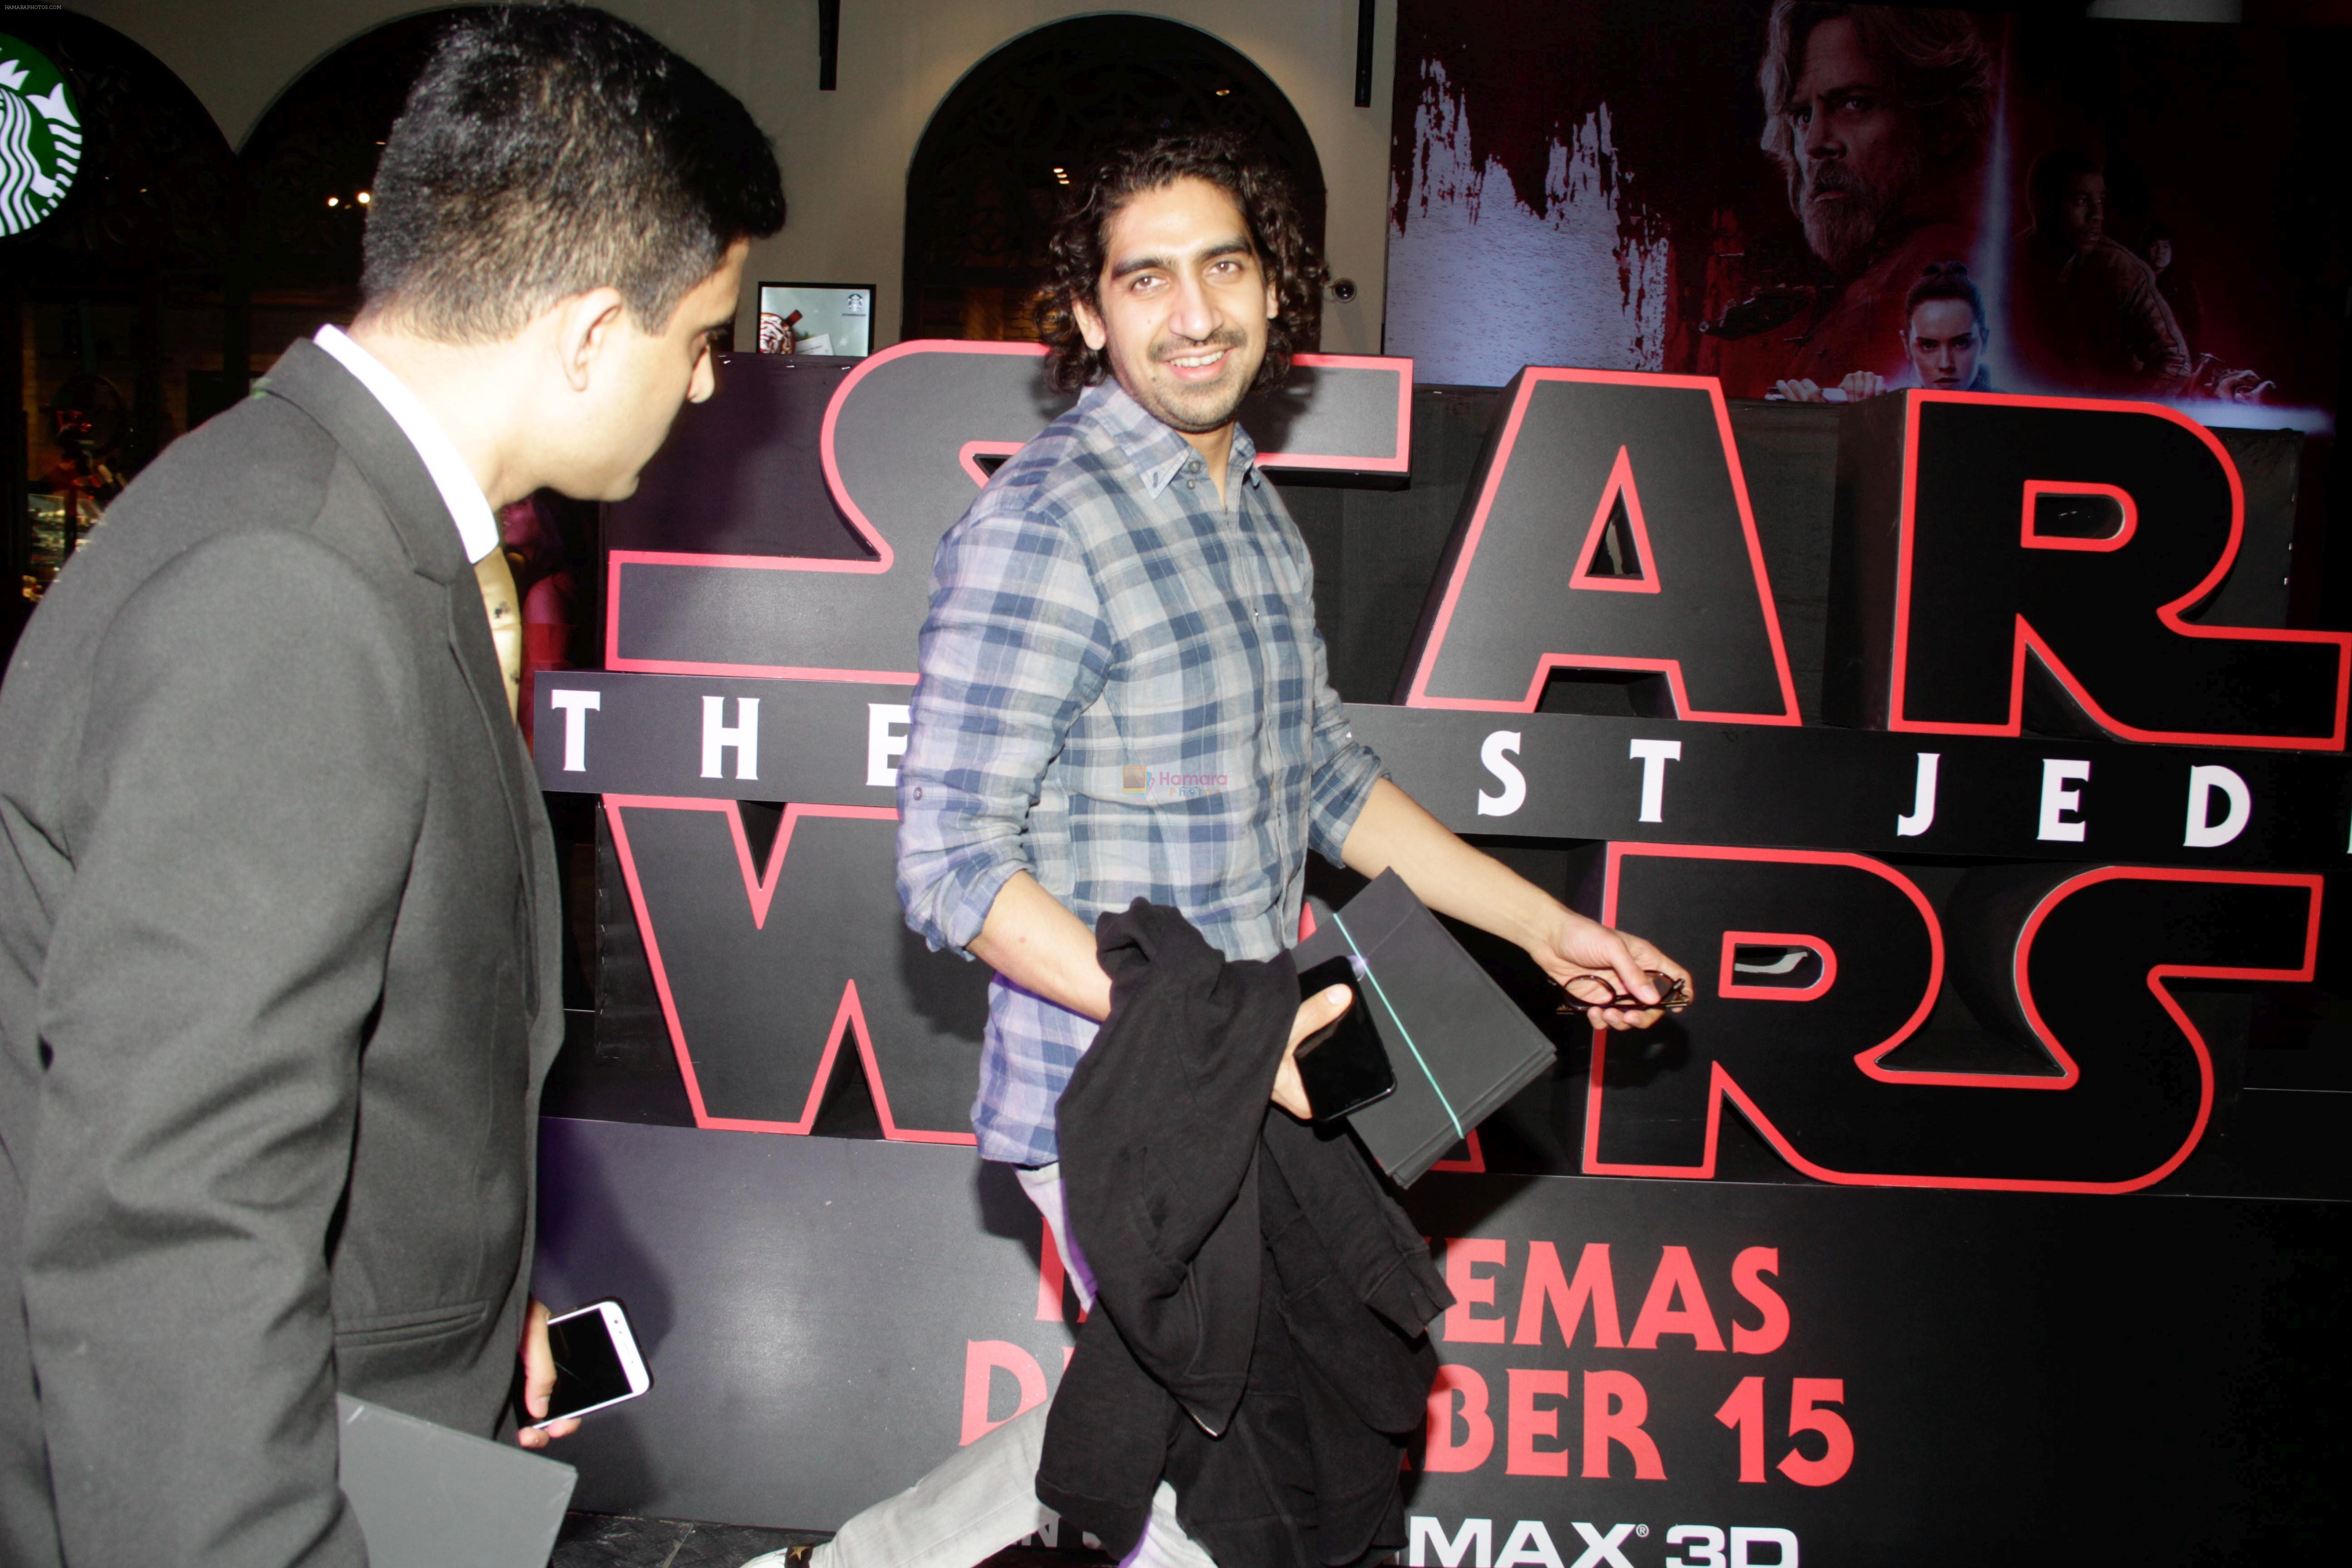 Ayan Mukherjee at the Red Carpet Premiere Of 2017's Most Awaited Hollywood Film Disney Star War on 13th Dec 2017